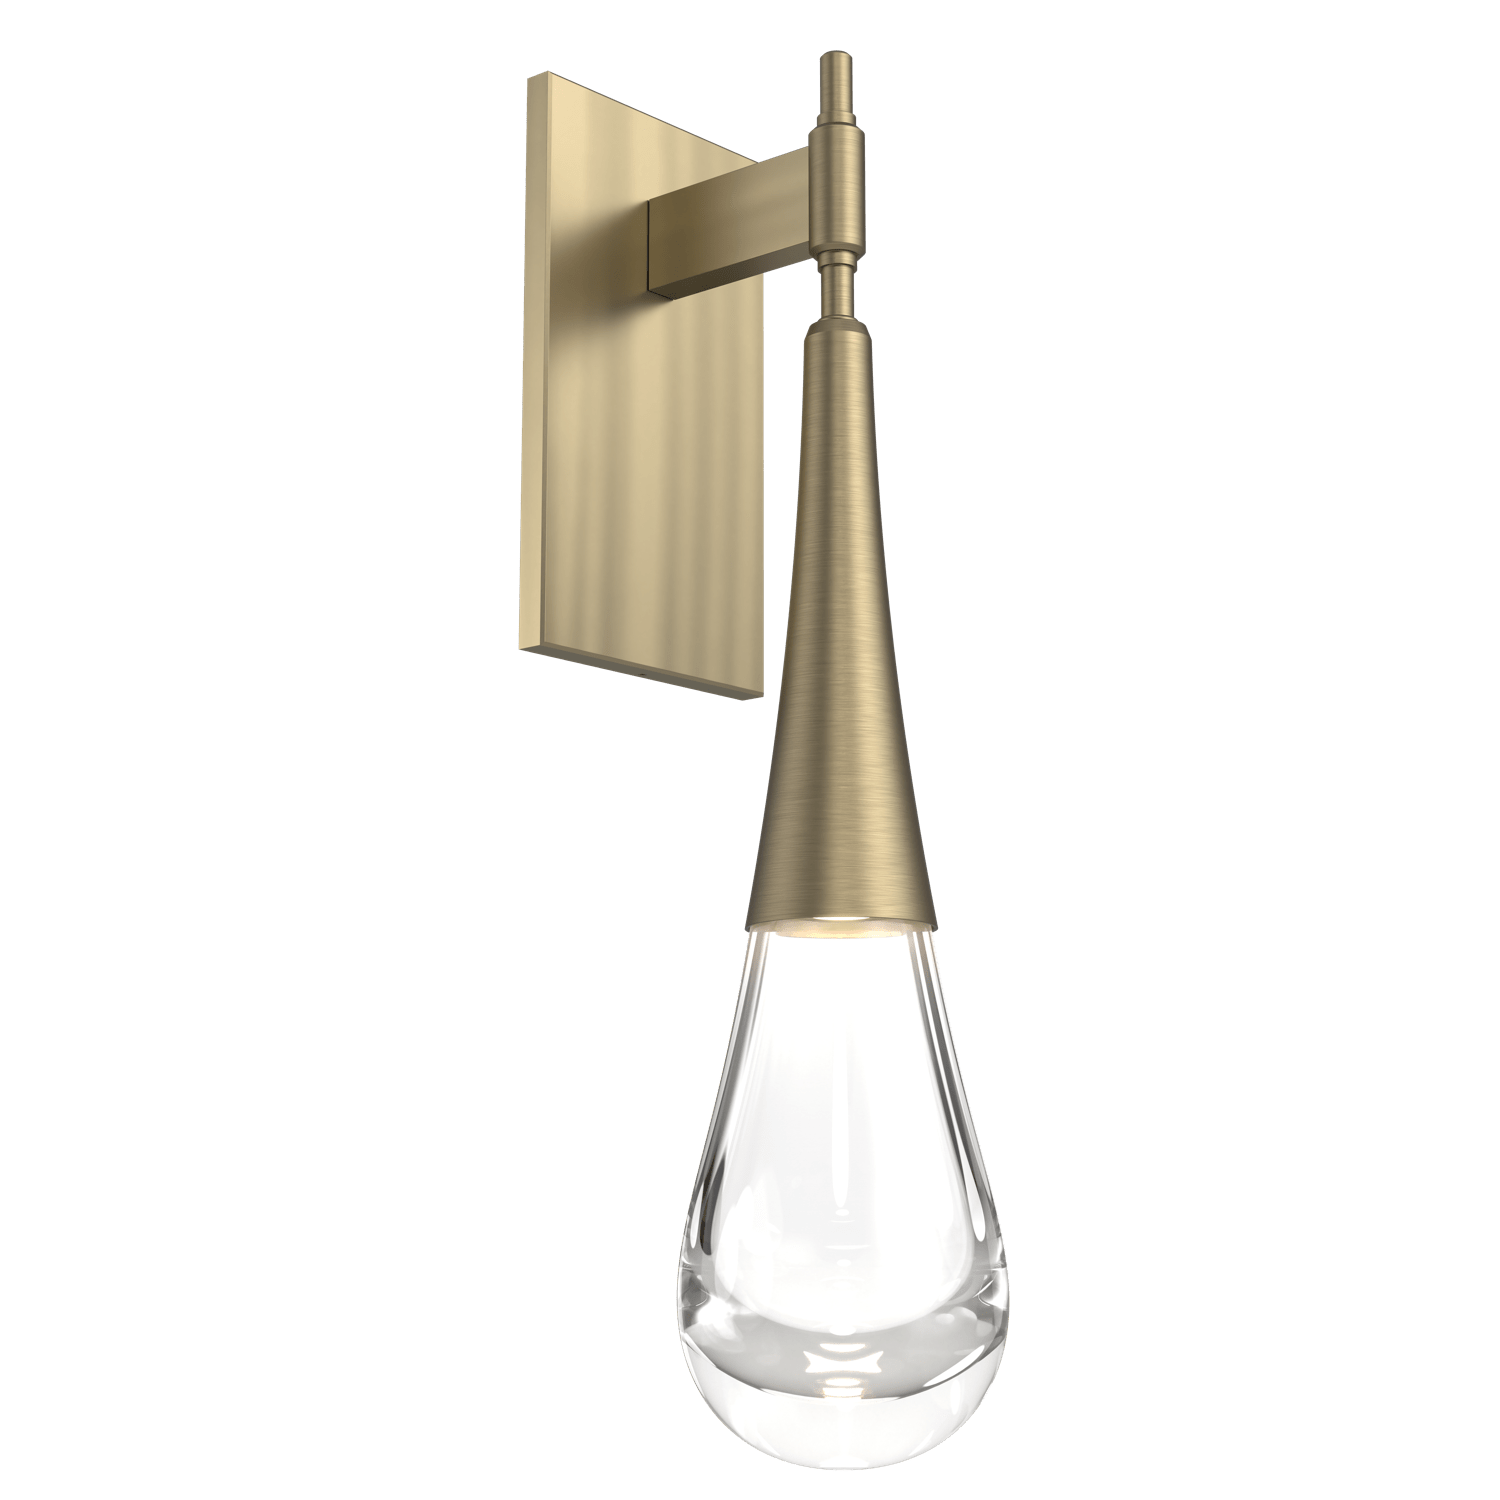 IDB0078-01-HB-Hammerton-Studio-Raindrop-wall-sconce-with-heritage-brass-finish-and-clear-blown-glass-shades-and-LED-lamping